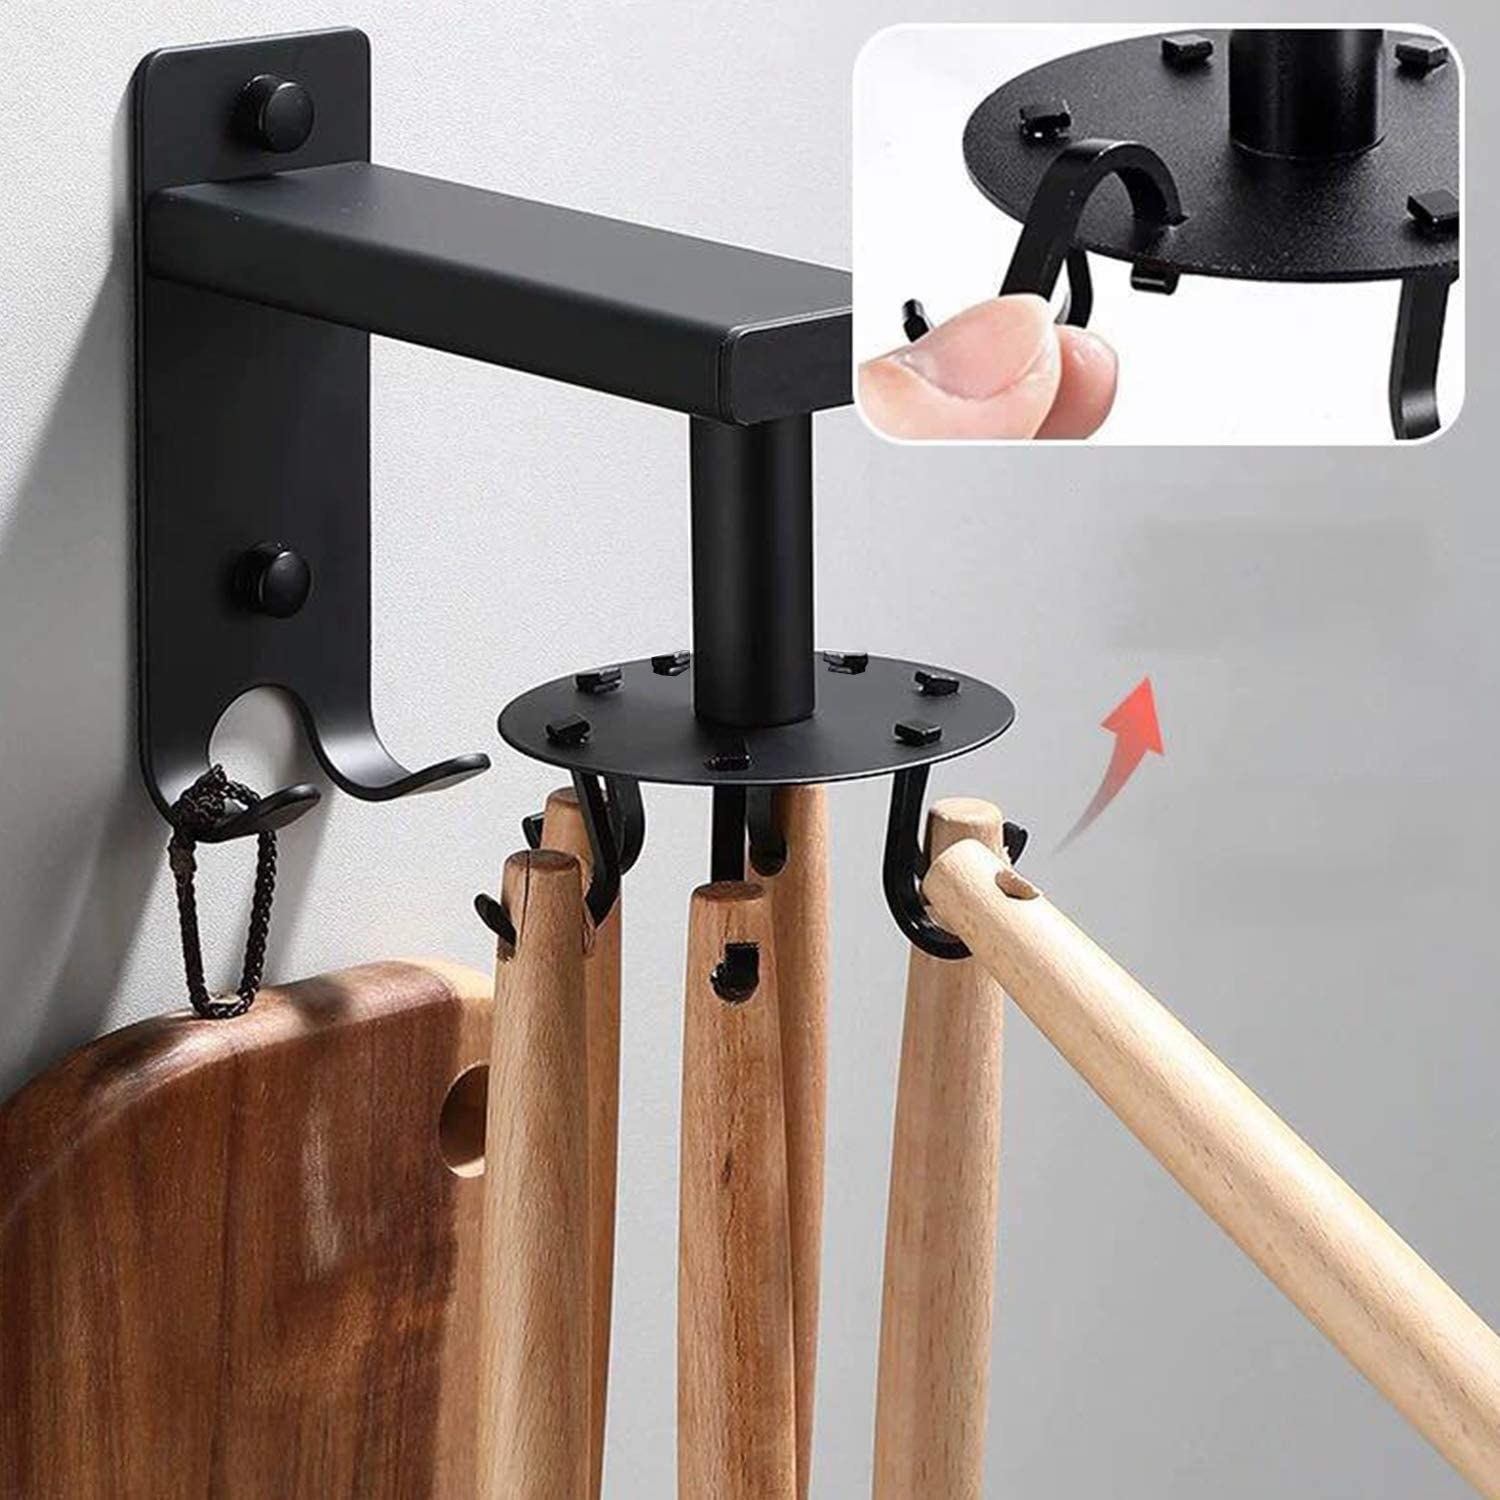 person putting a wooden utensil on the hook